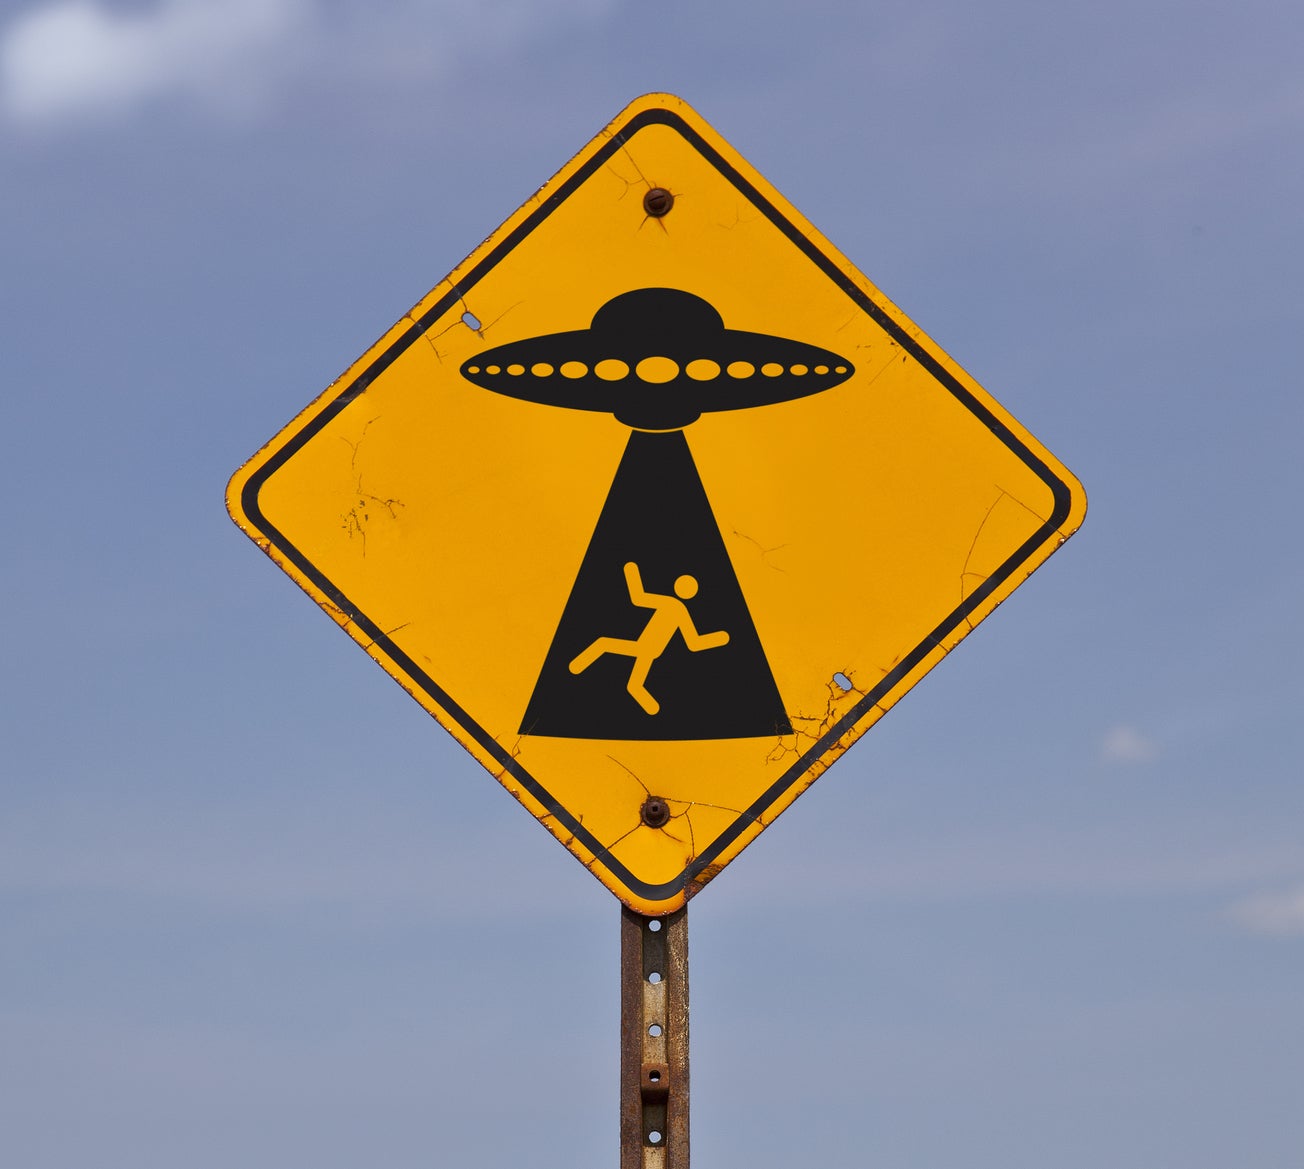 A road sign warning of possible alien abduction